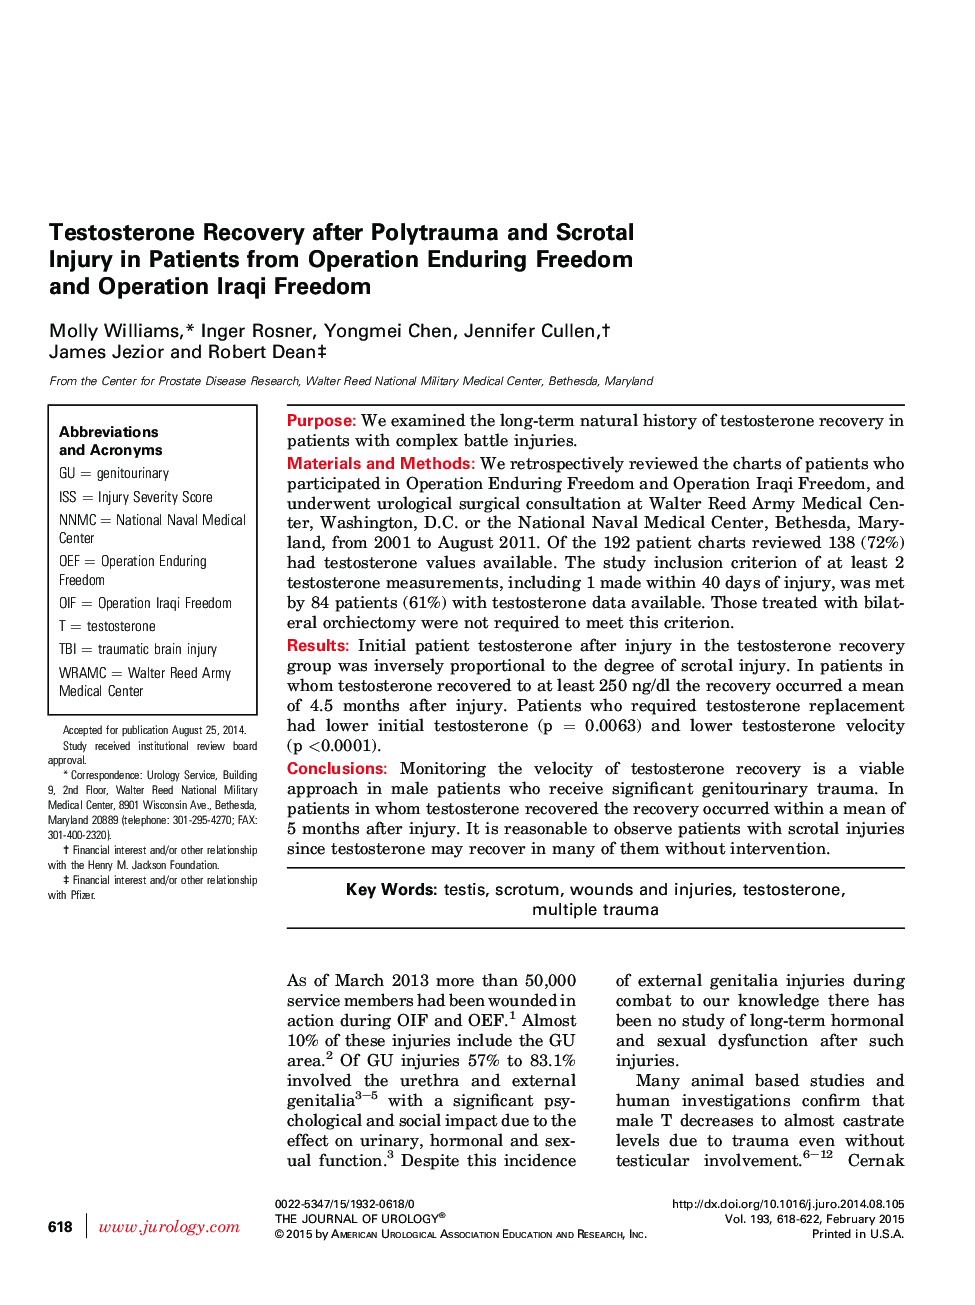 Testosterone Recovery after Polytrauma and Scrotal Injury in Patients from Operation Enduring Freedom and Operation Iraqi Freedom